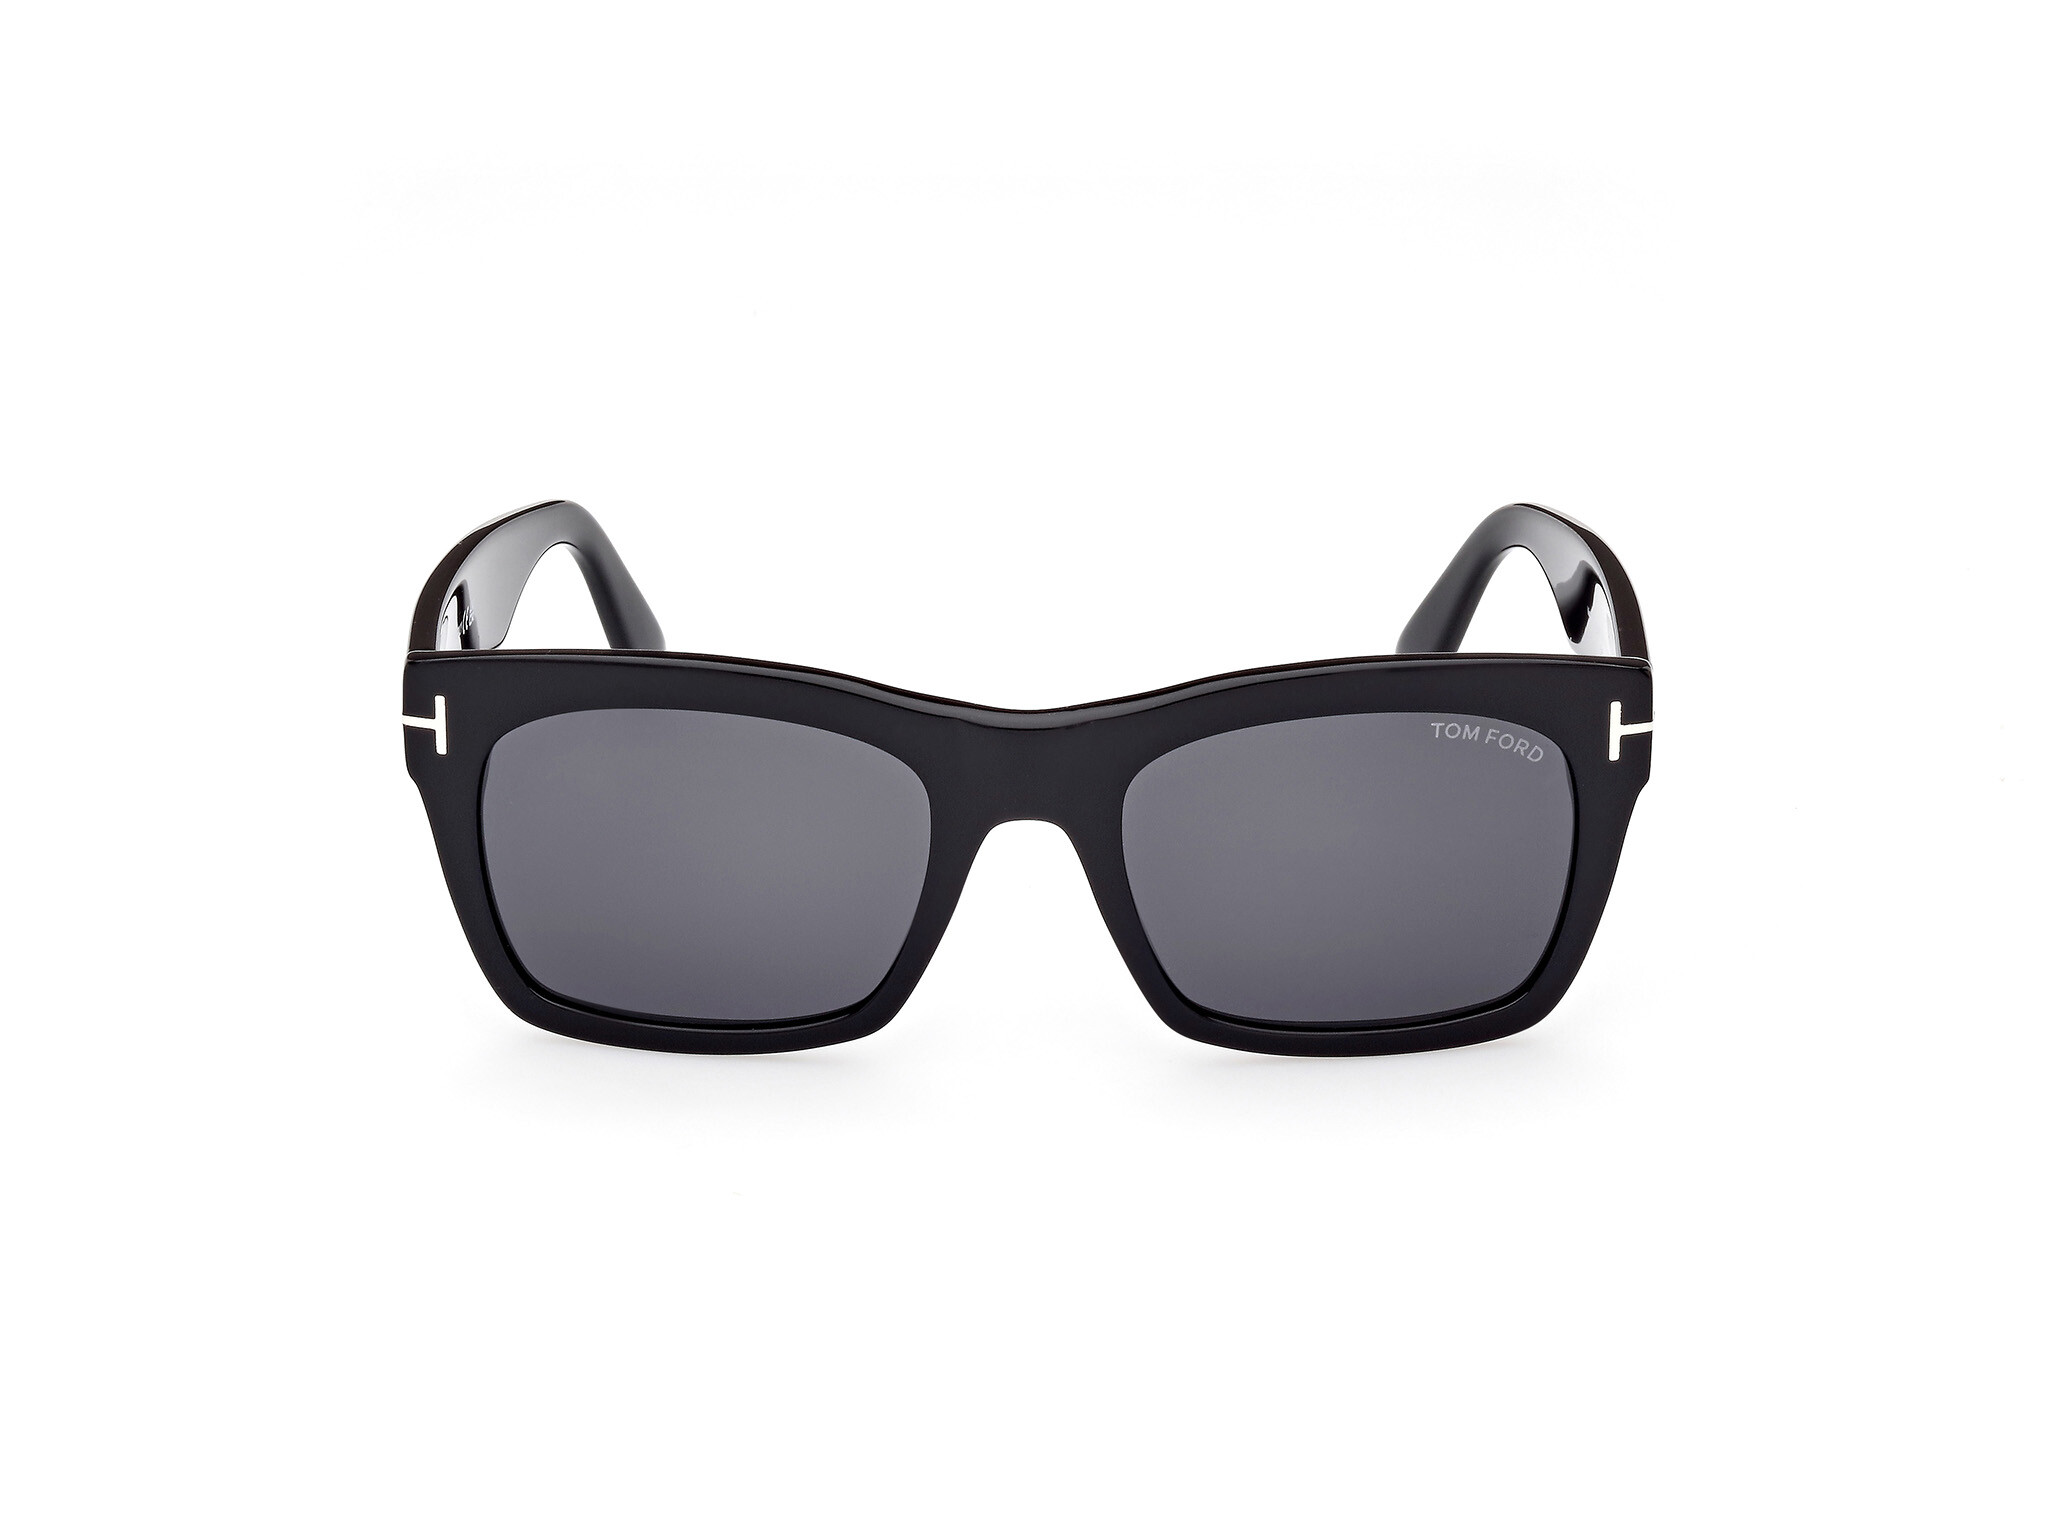 [products.image.front] Tom Ford FT1062 01A Sonnenbrille